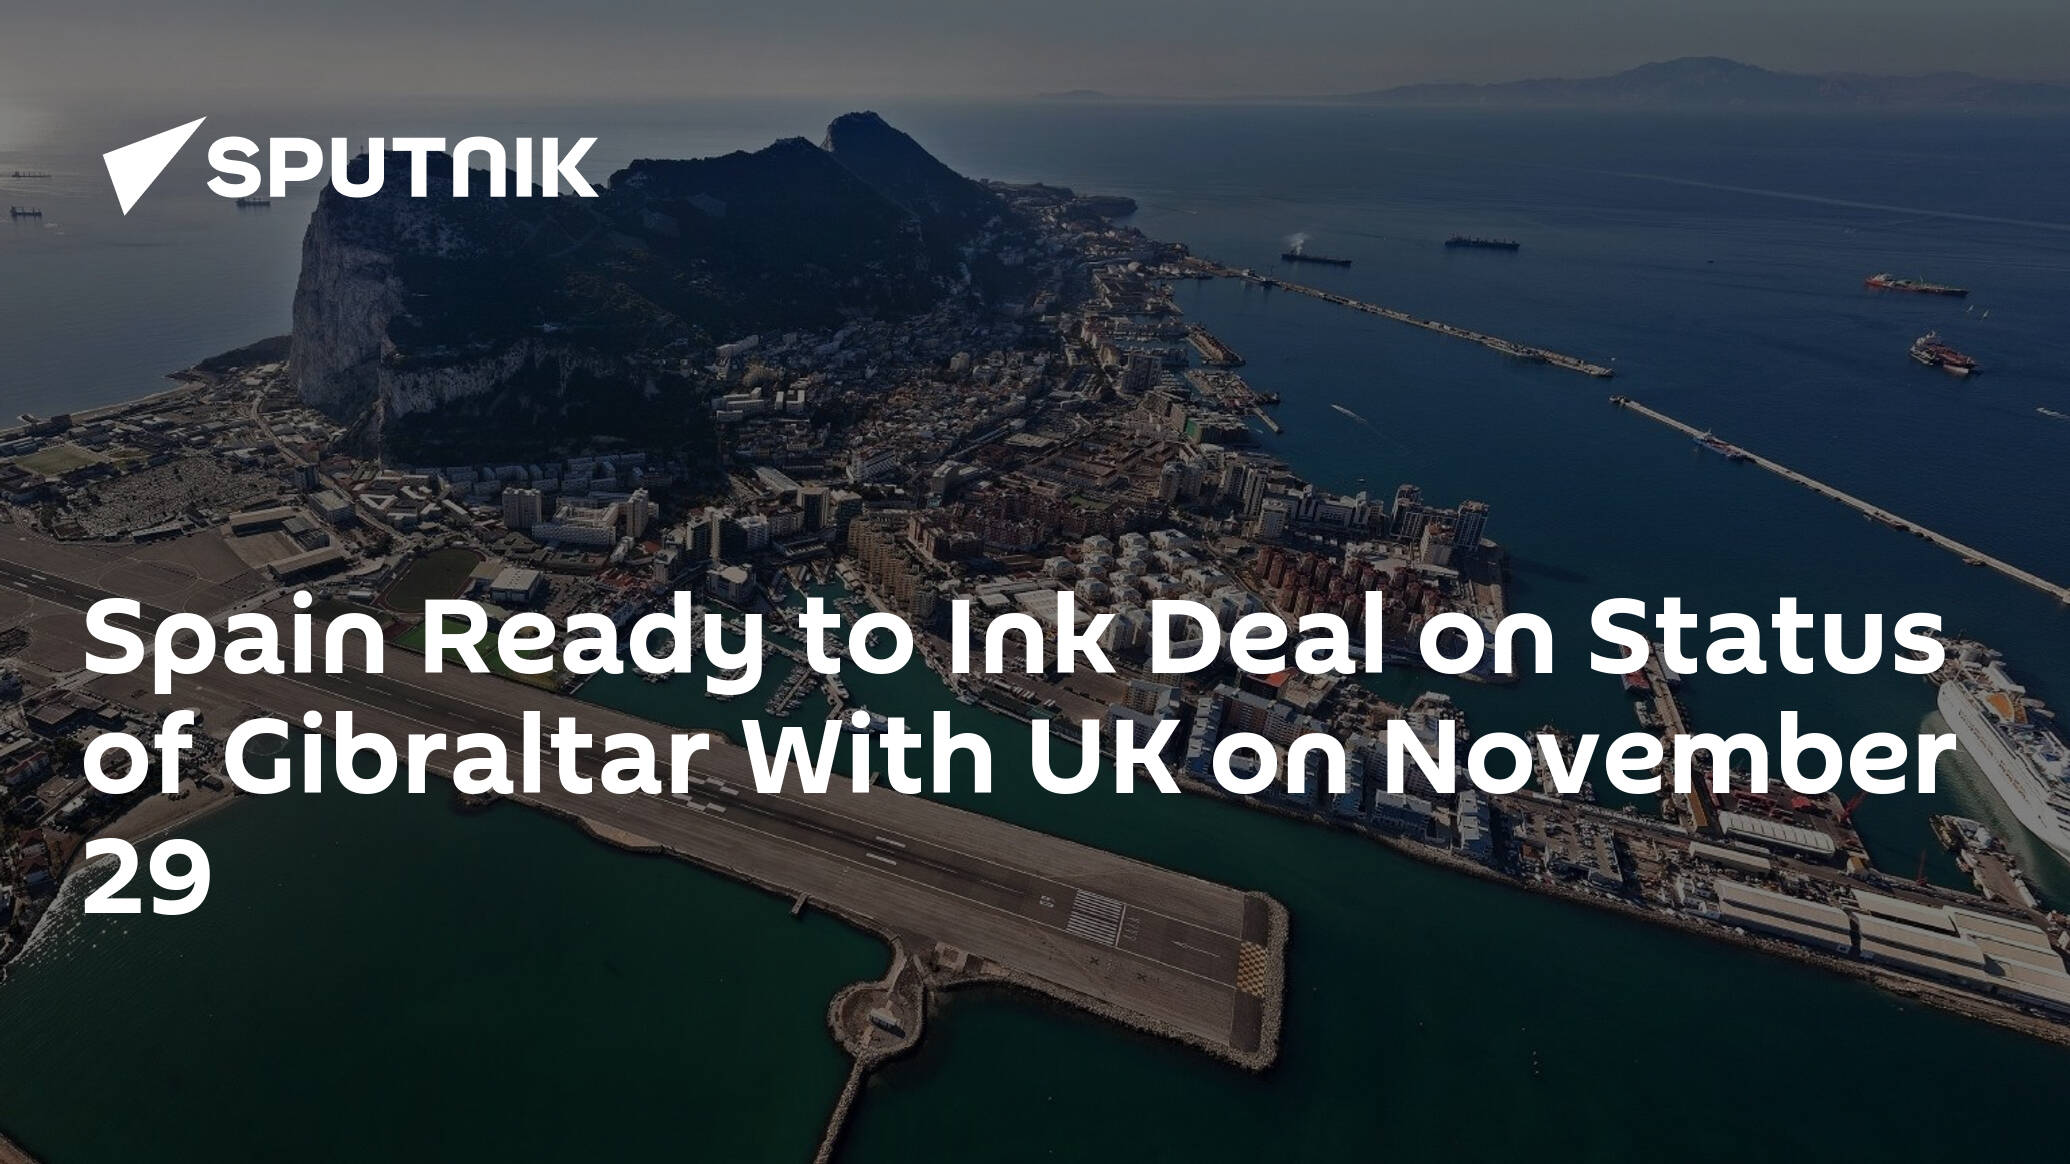 Spain Ready to Ink Deal on Status of Gibraltar With UK on November 29